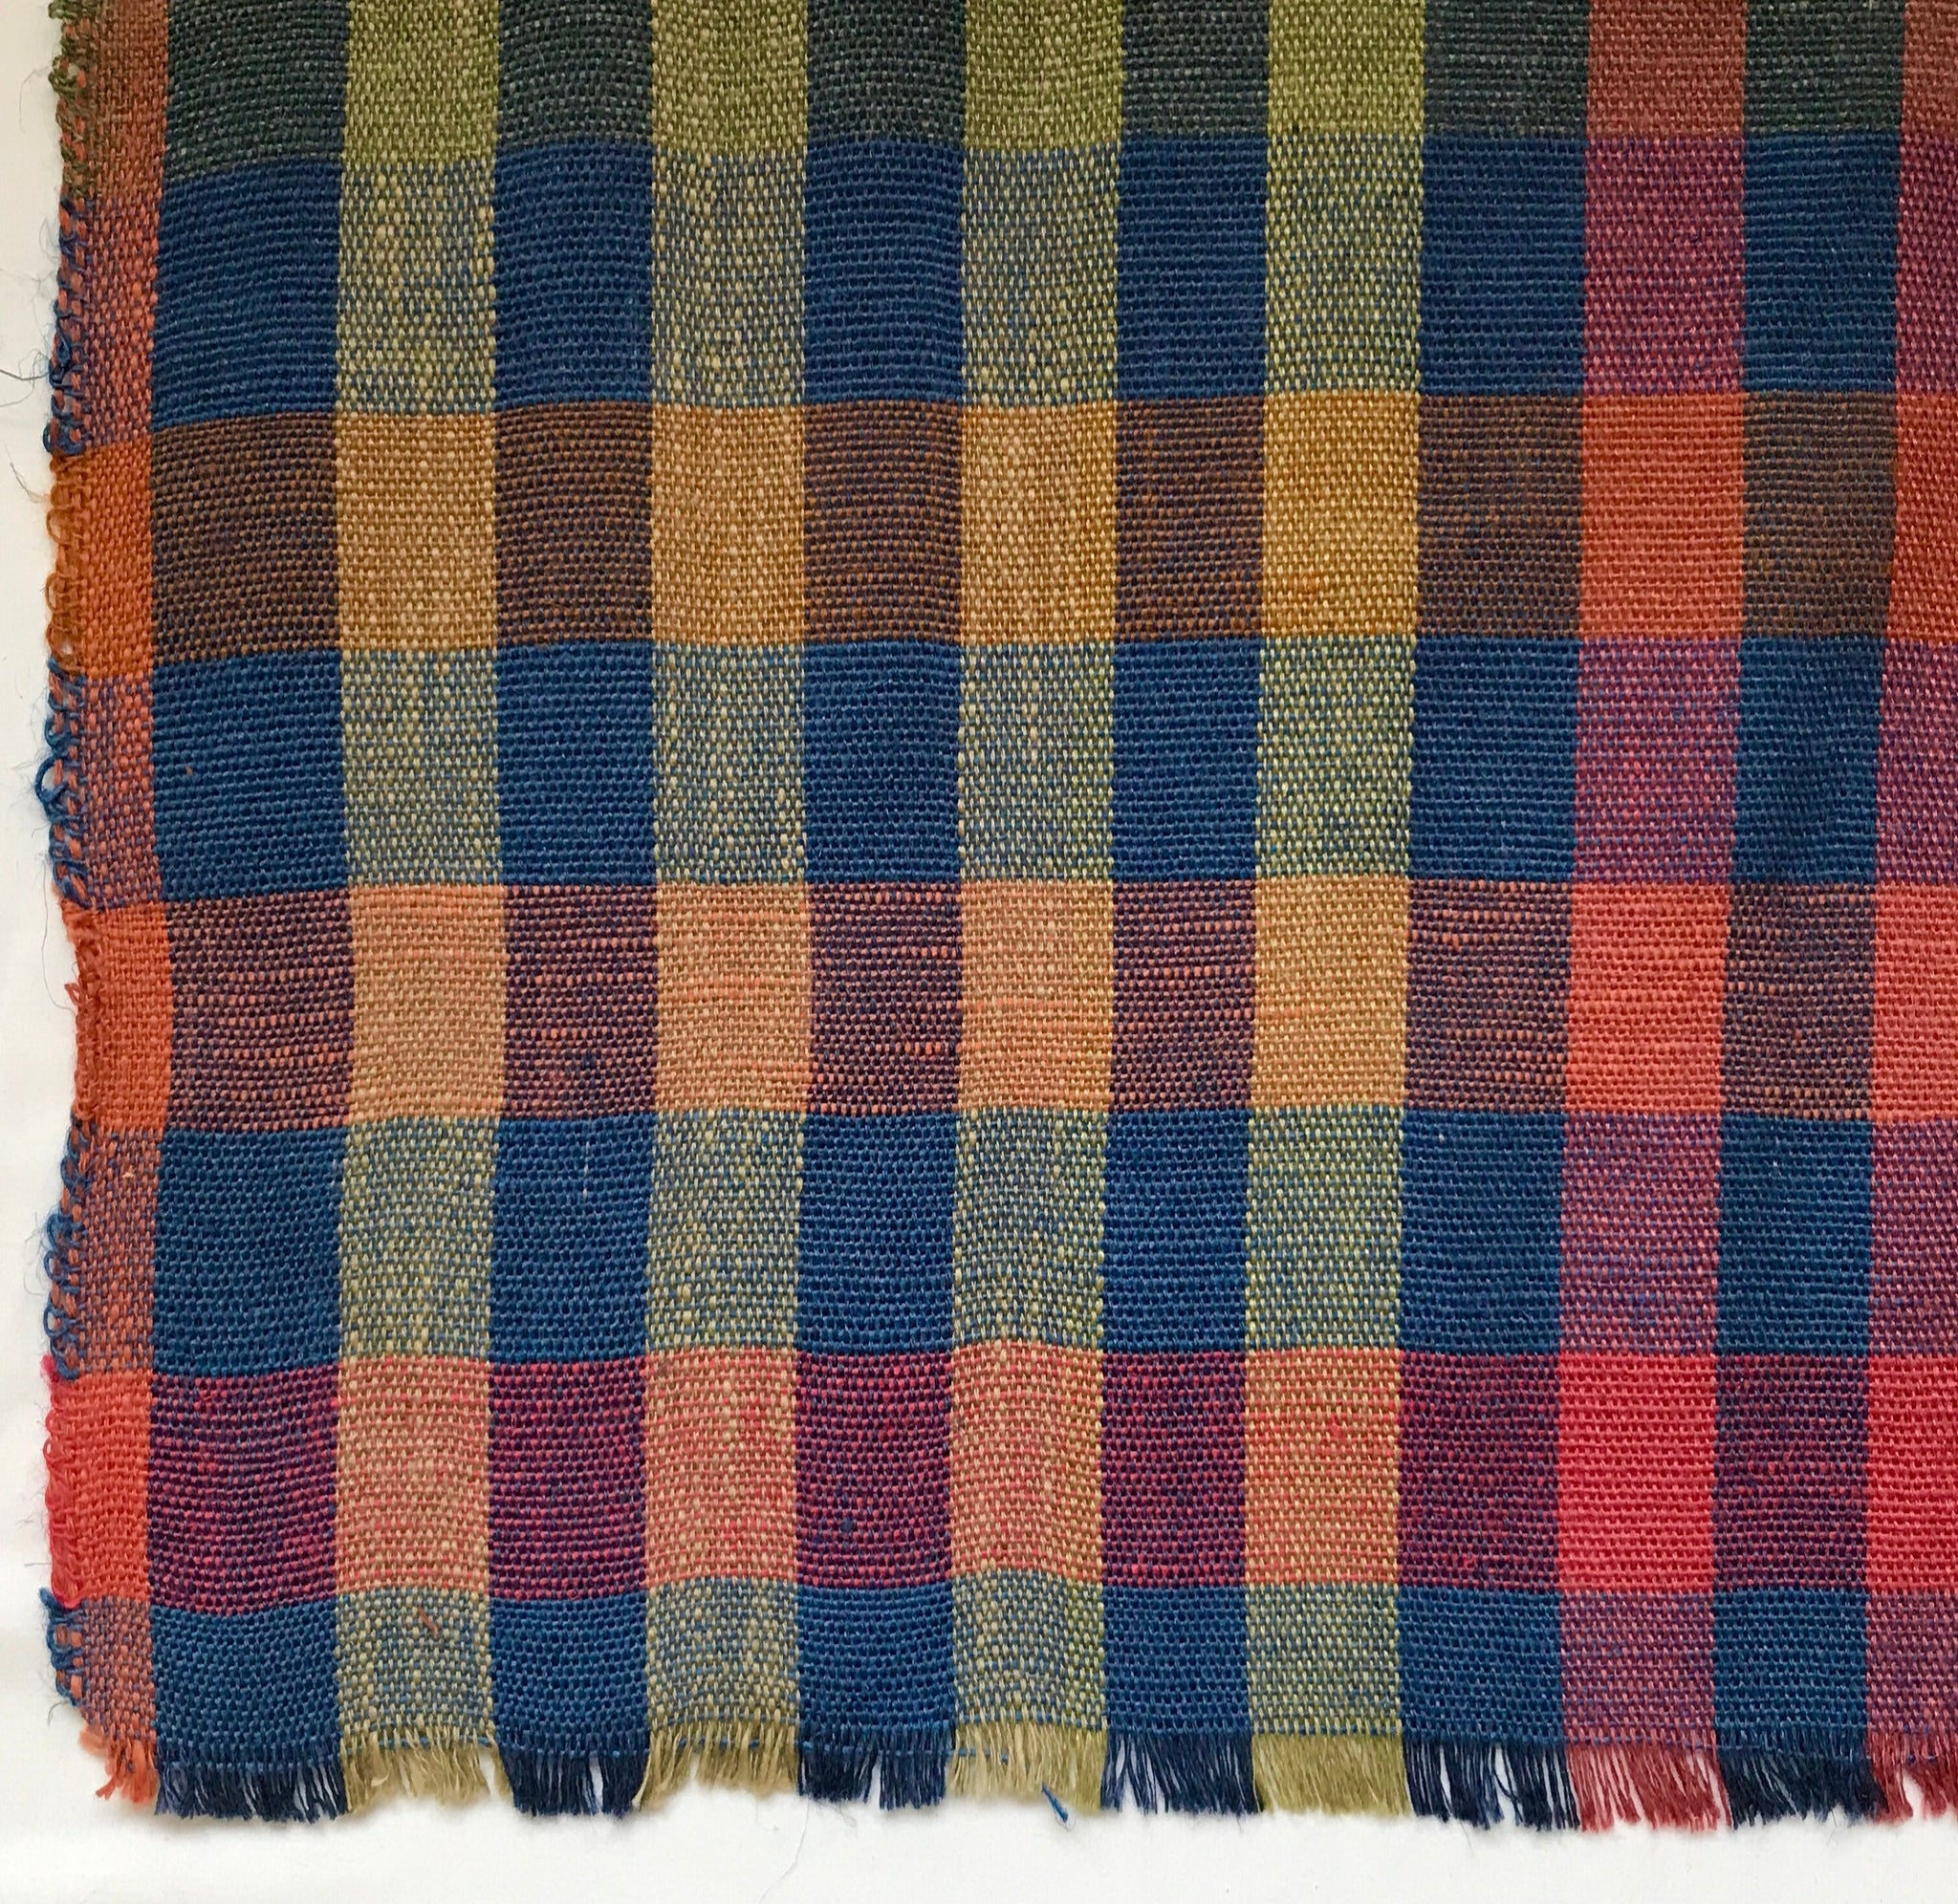 Handwoven Chequered Picnic